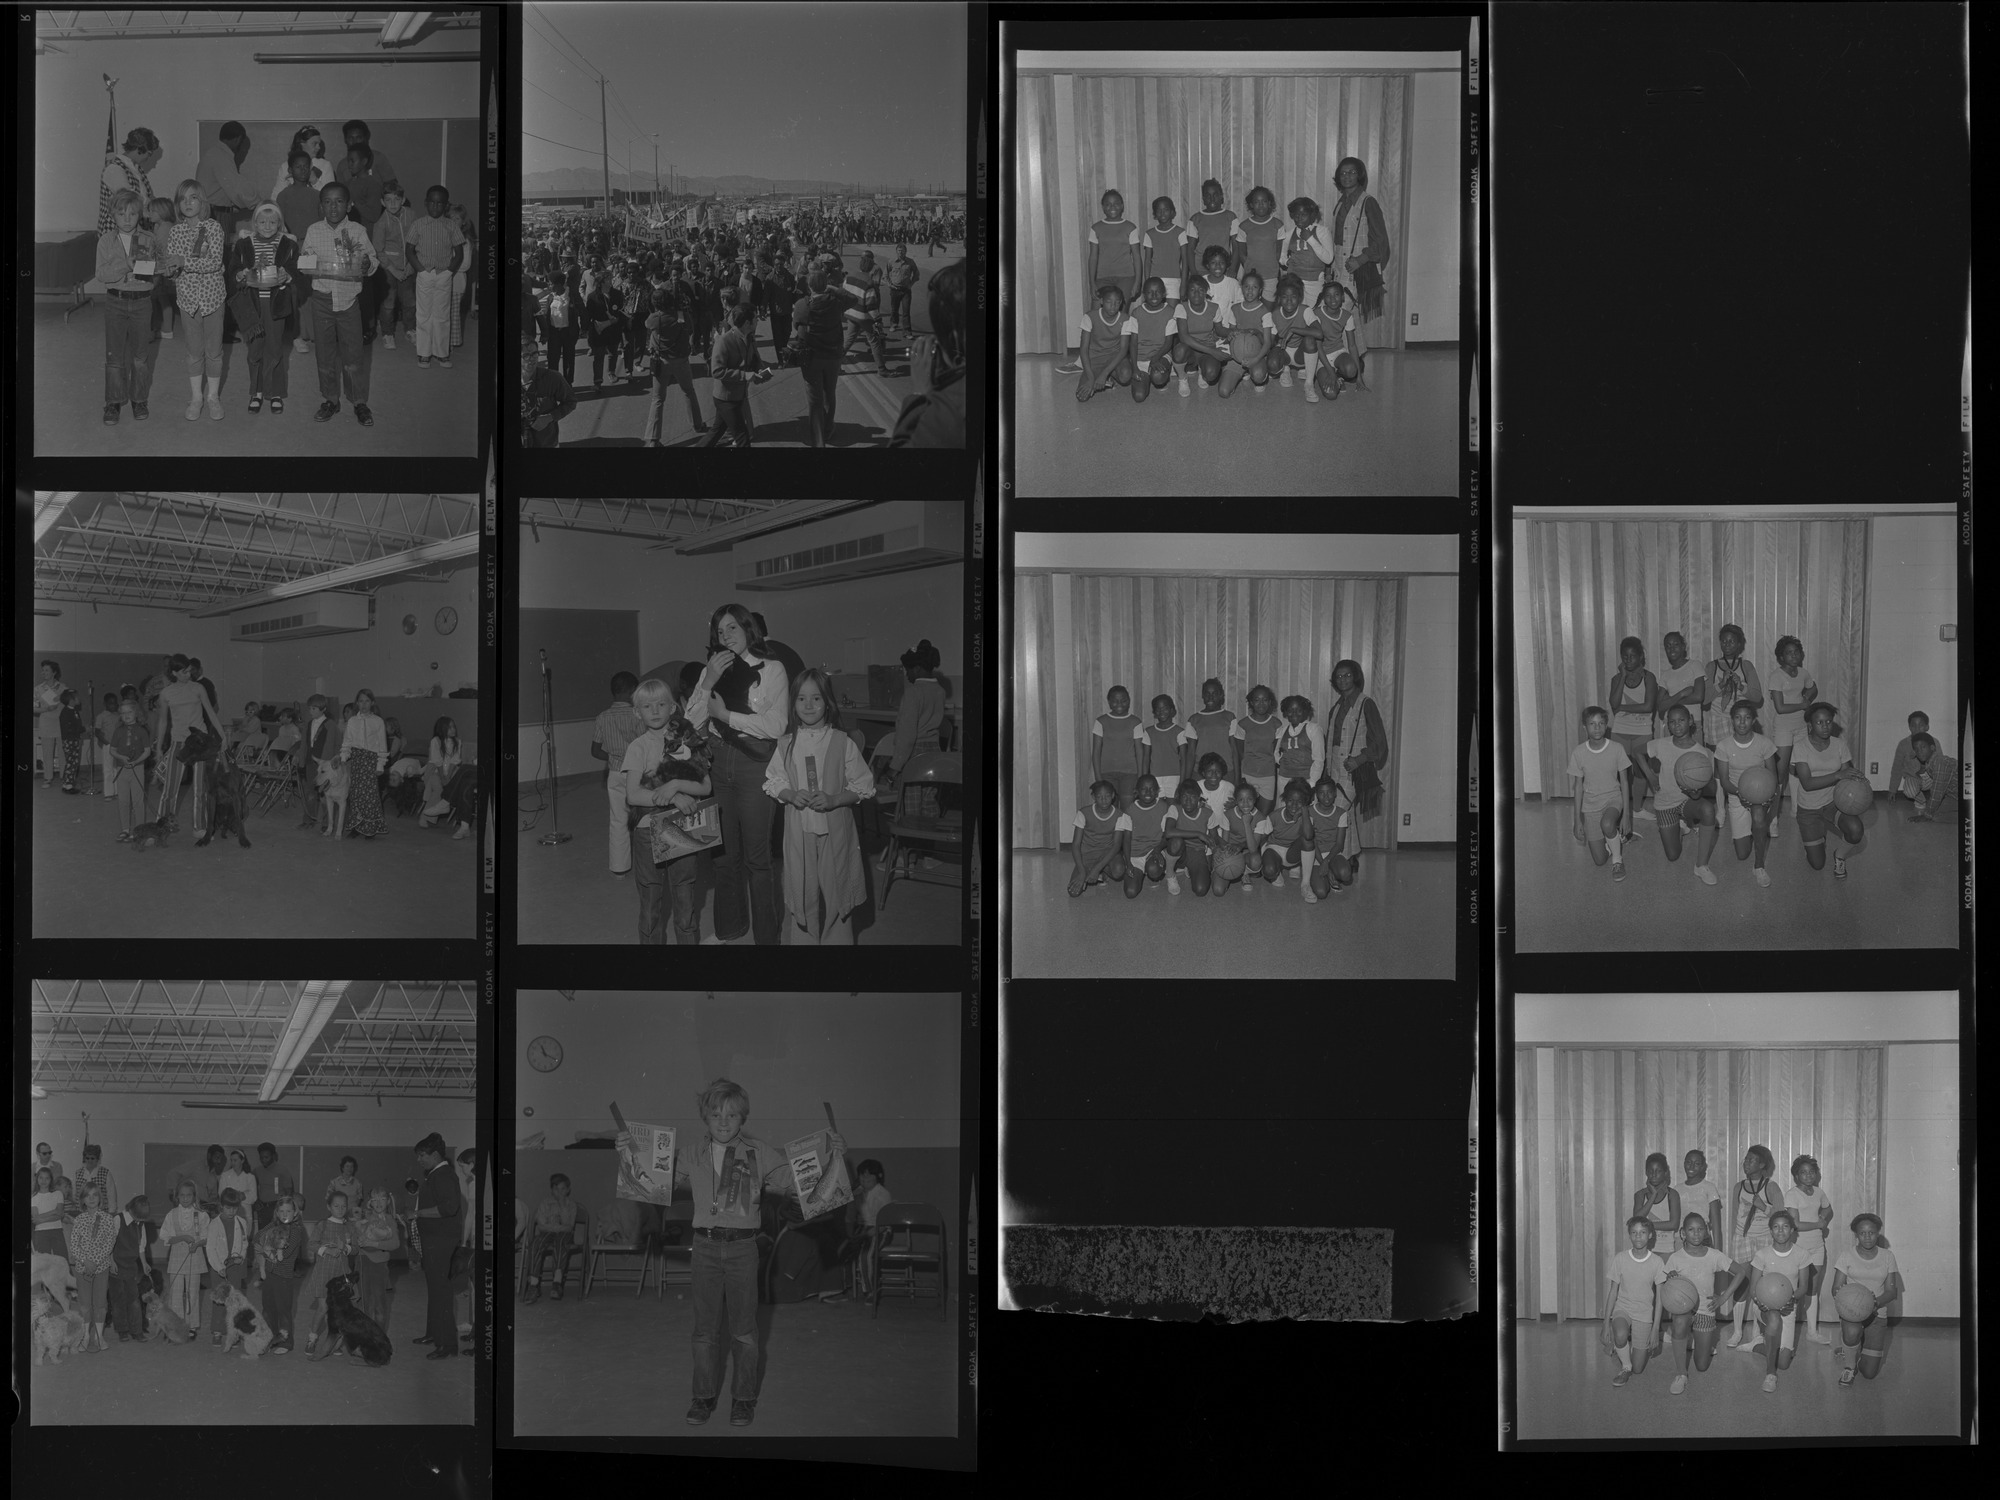 Set of negatives by Clinton Wright including Basketball tournament girls at Doolittle, Bonanza School Pet Show, boxing team at Doolittle, and Welfare Rights march on Strip, 1971, page 2